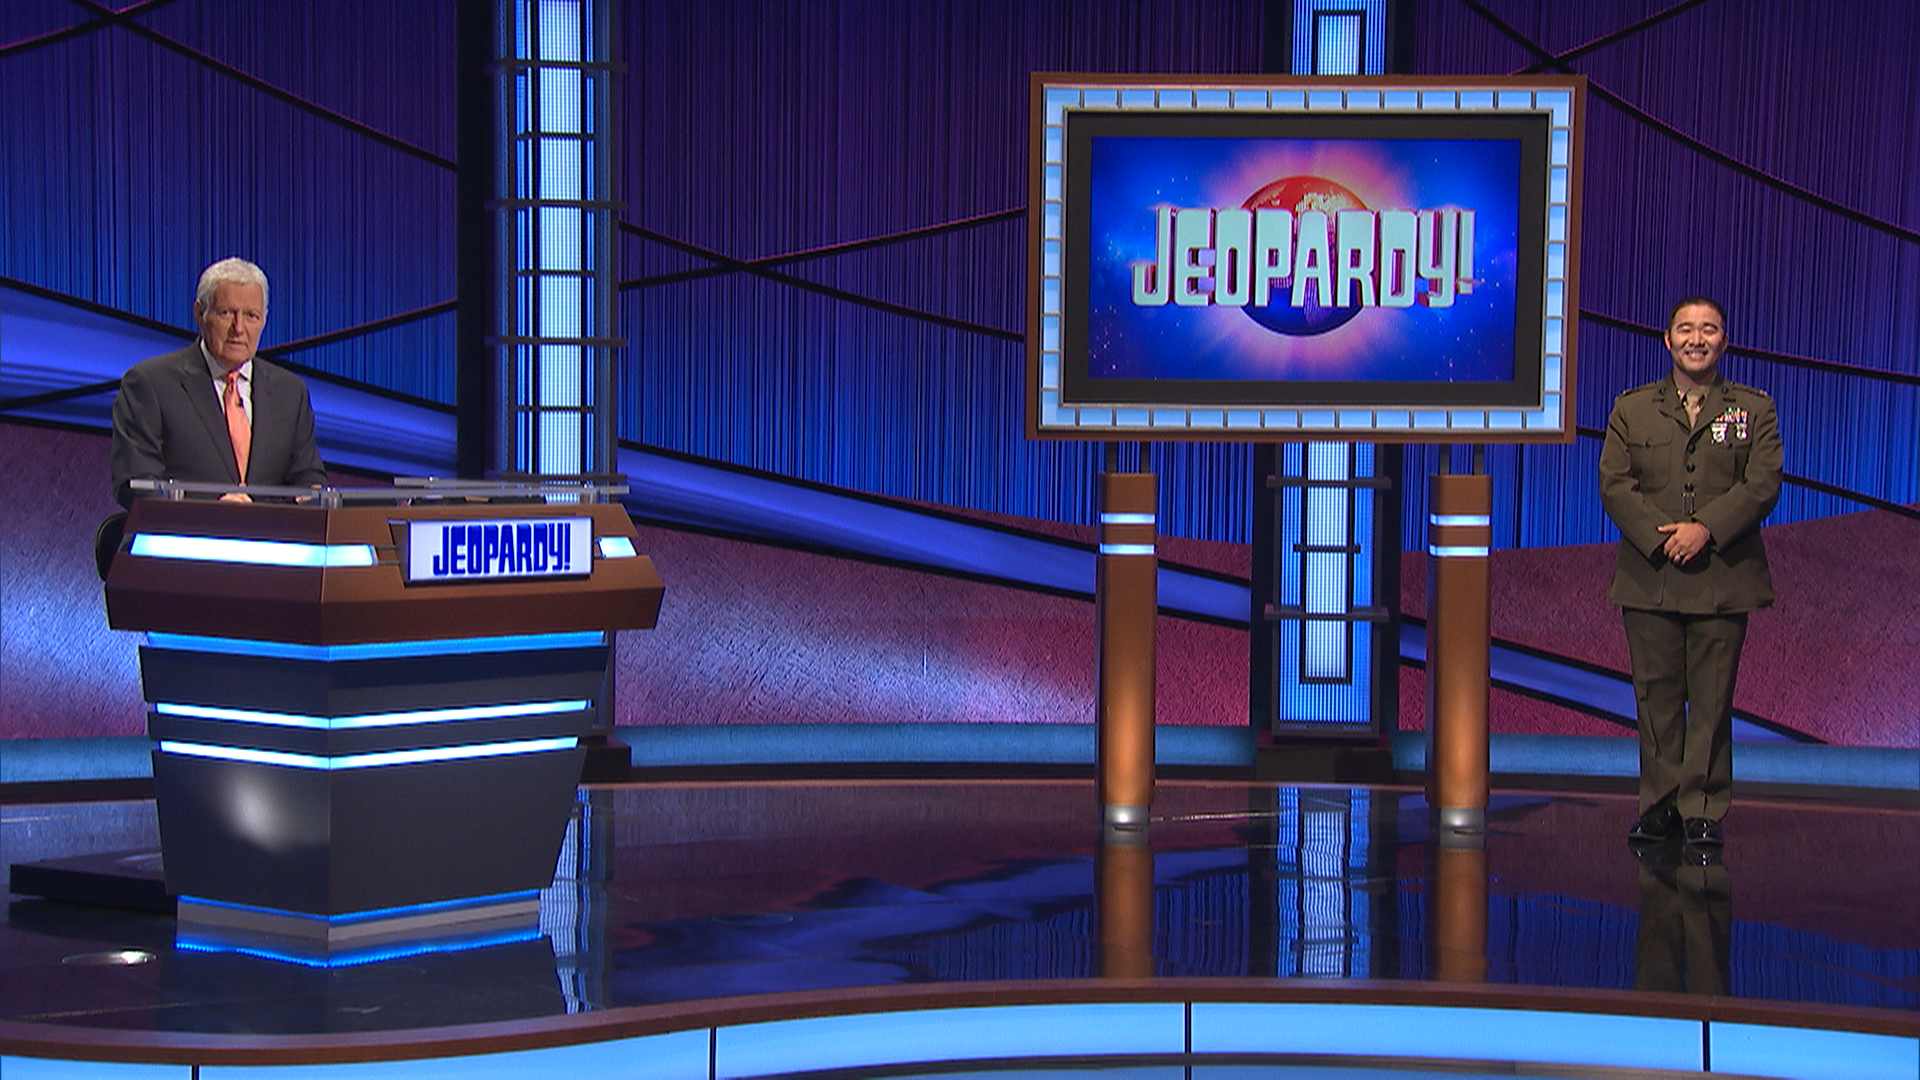 An Elk Grove Marine lands a spot on Jeopardy while taking a break from medical school. His appearance takes place Friday night.